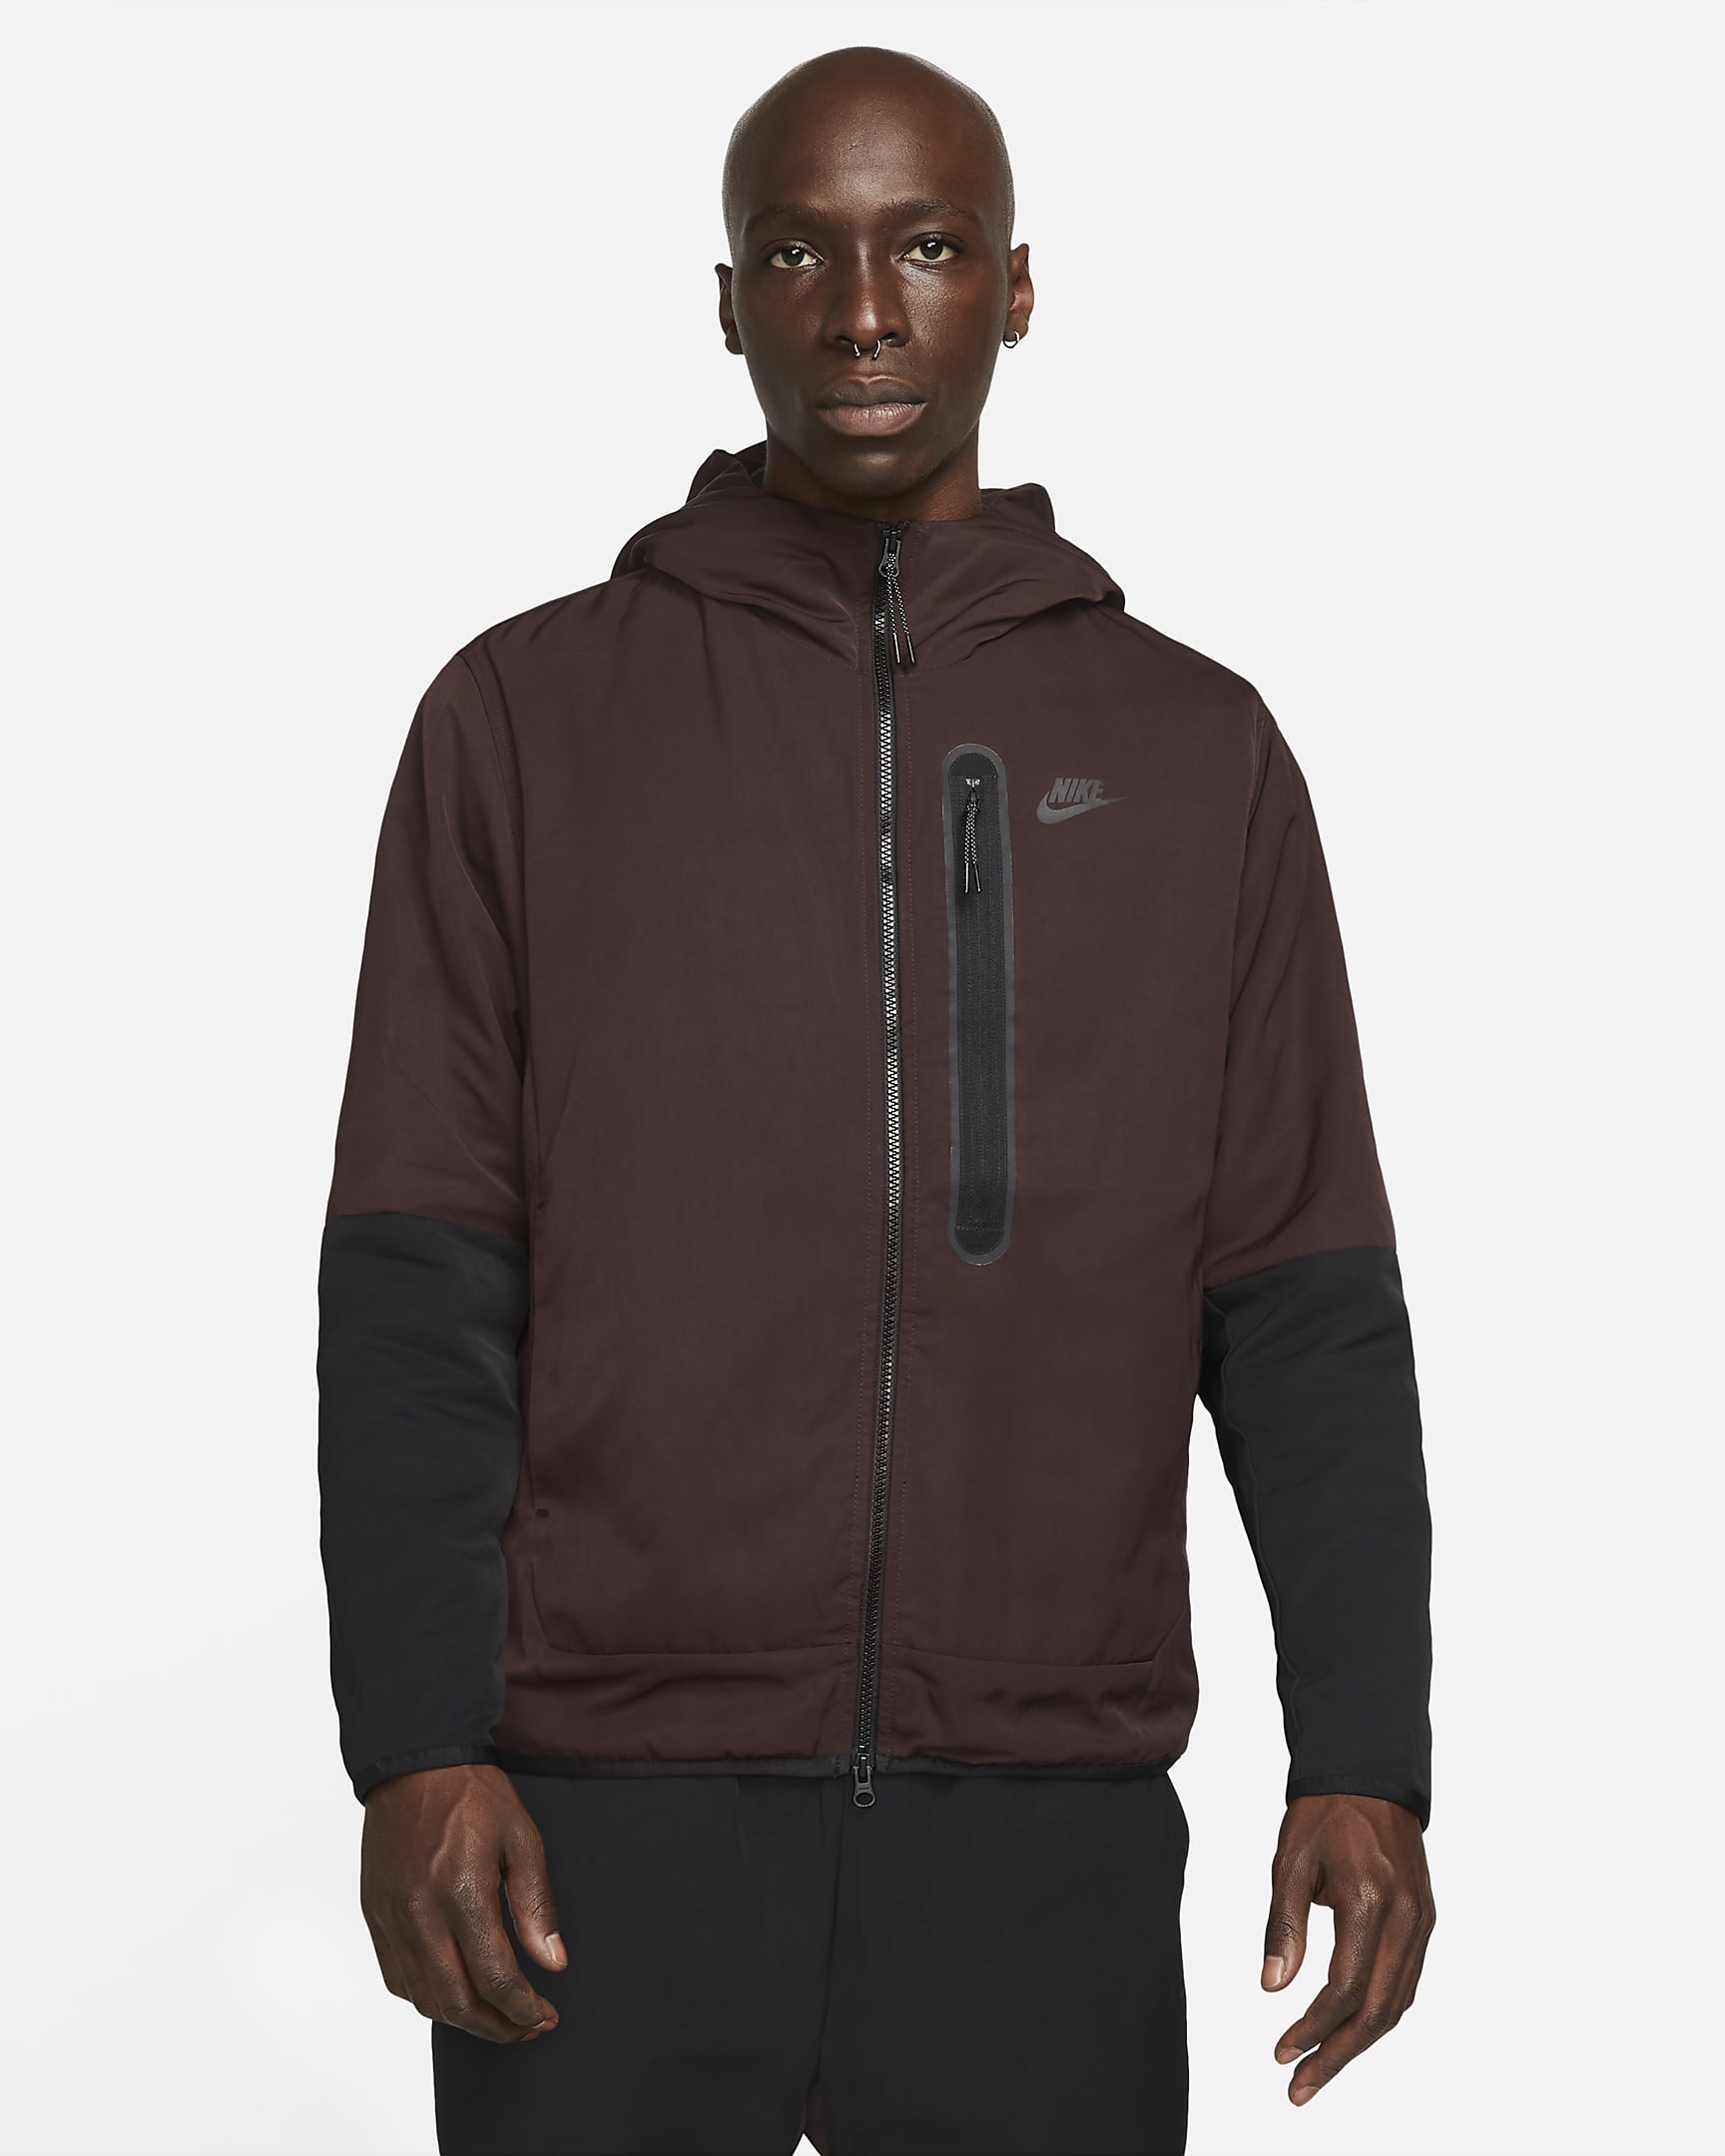 nike-sportswear-tech-essentials-mens-repel-hooded-jacket-Q0FT64.png